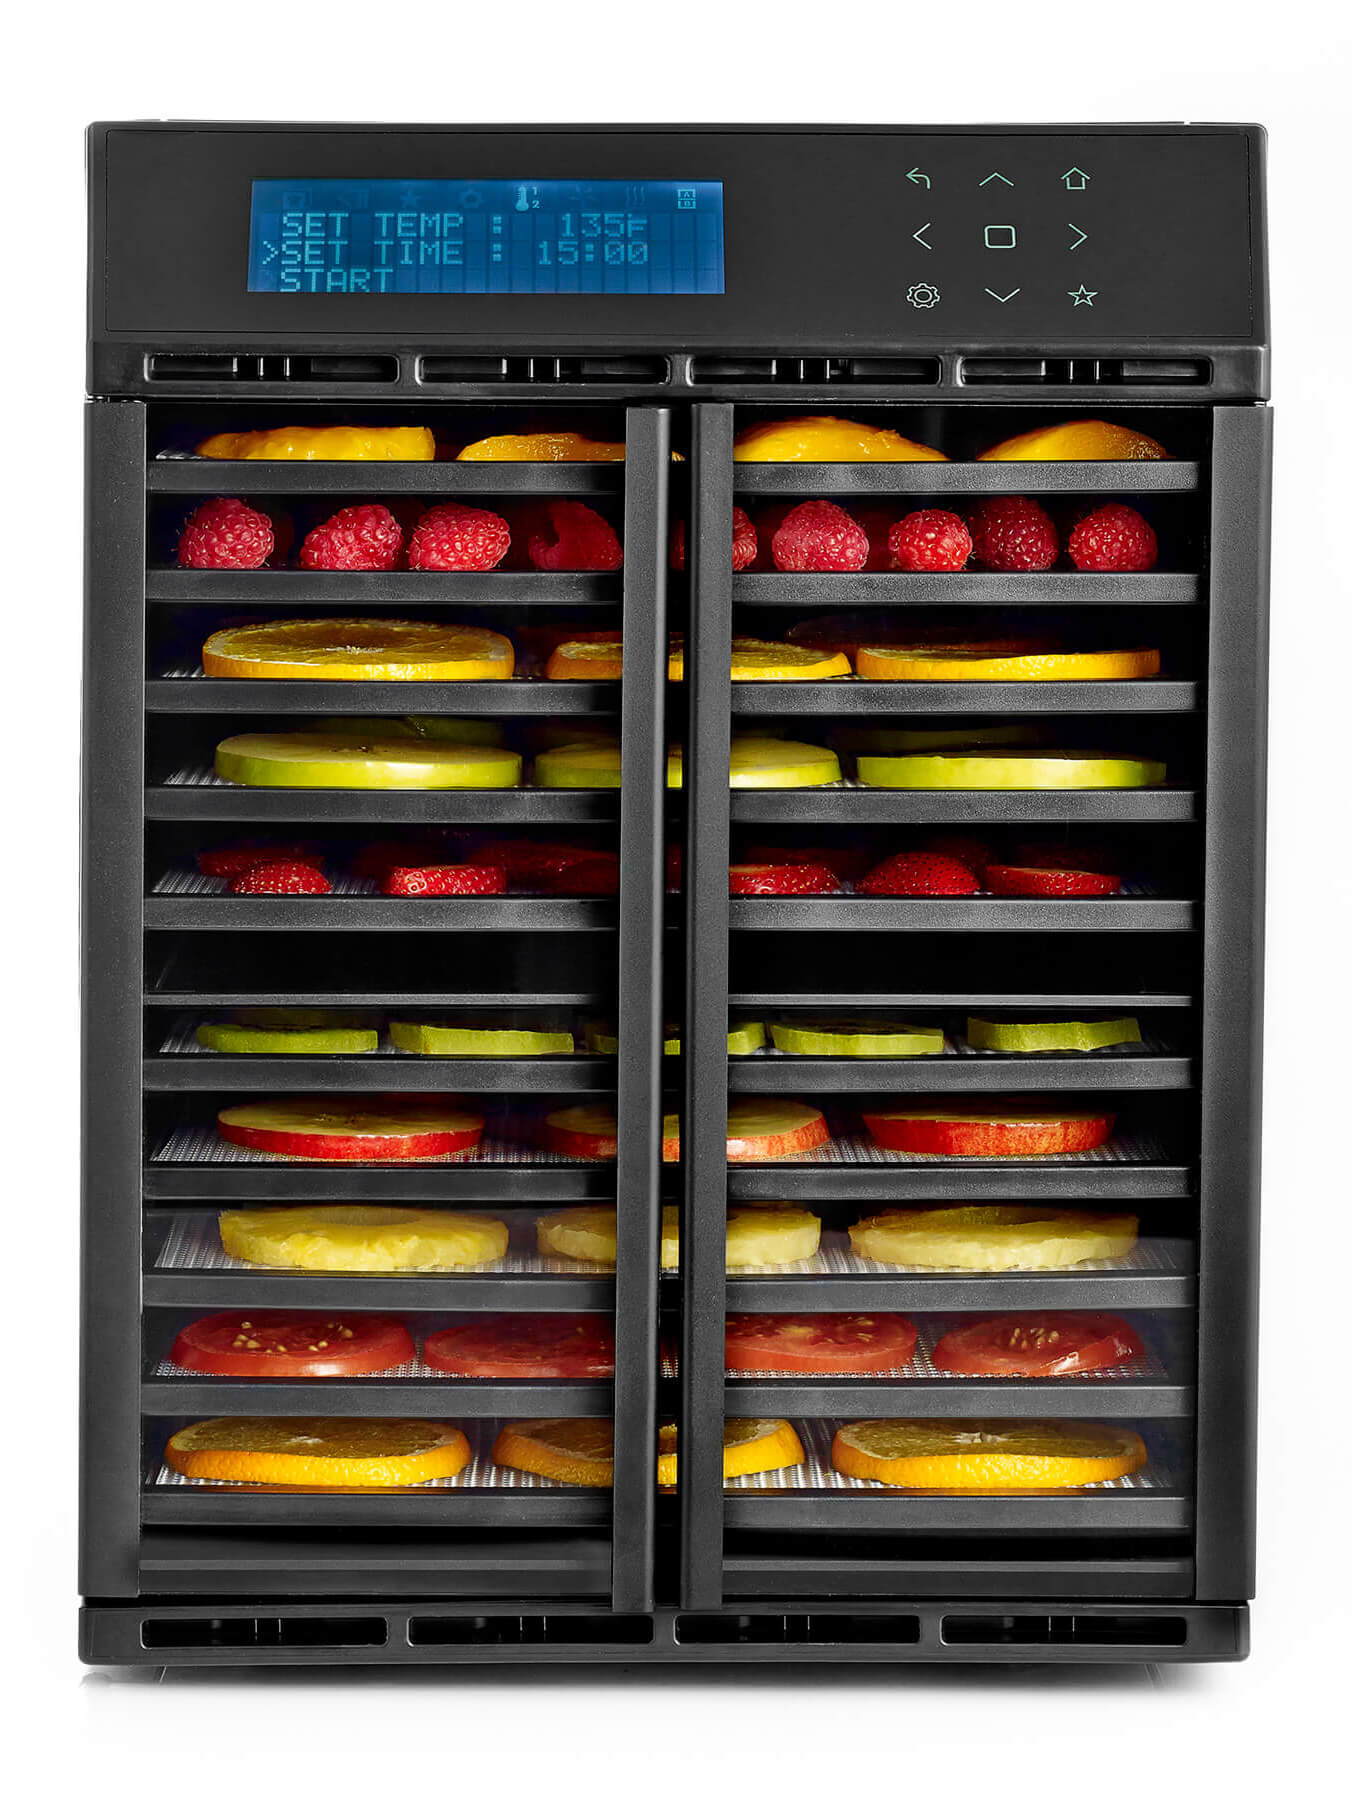 Excalibur RES10 10 tray dehydrator with food on the trays and clear doors closed.